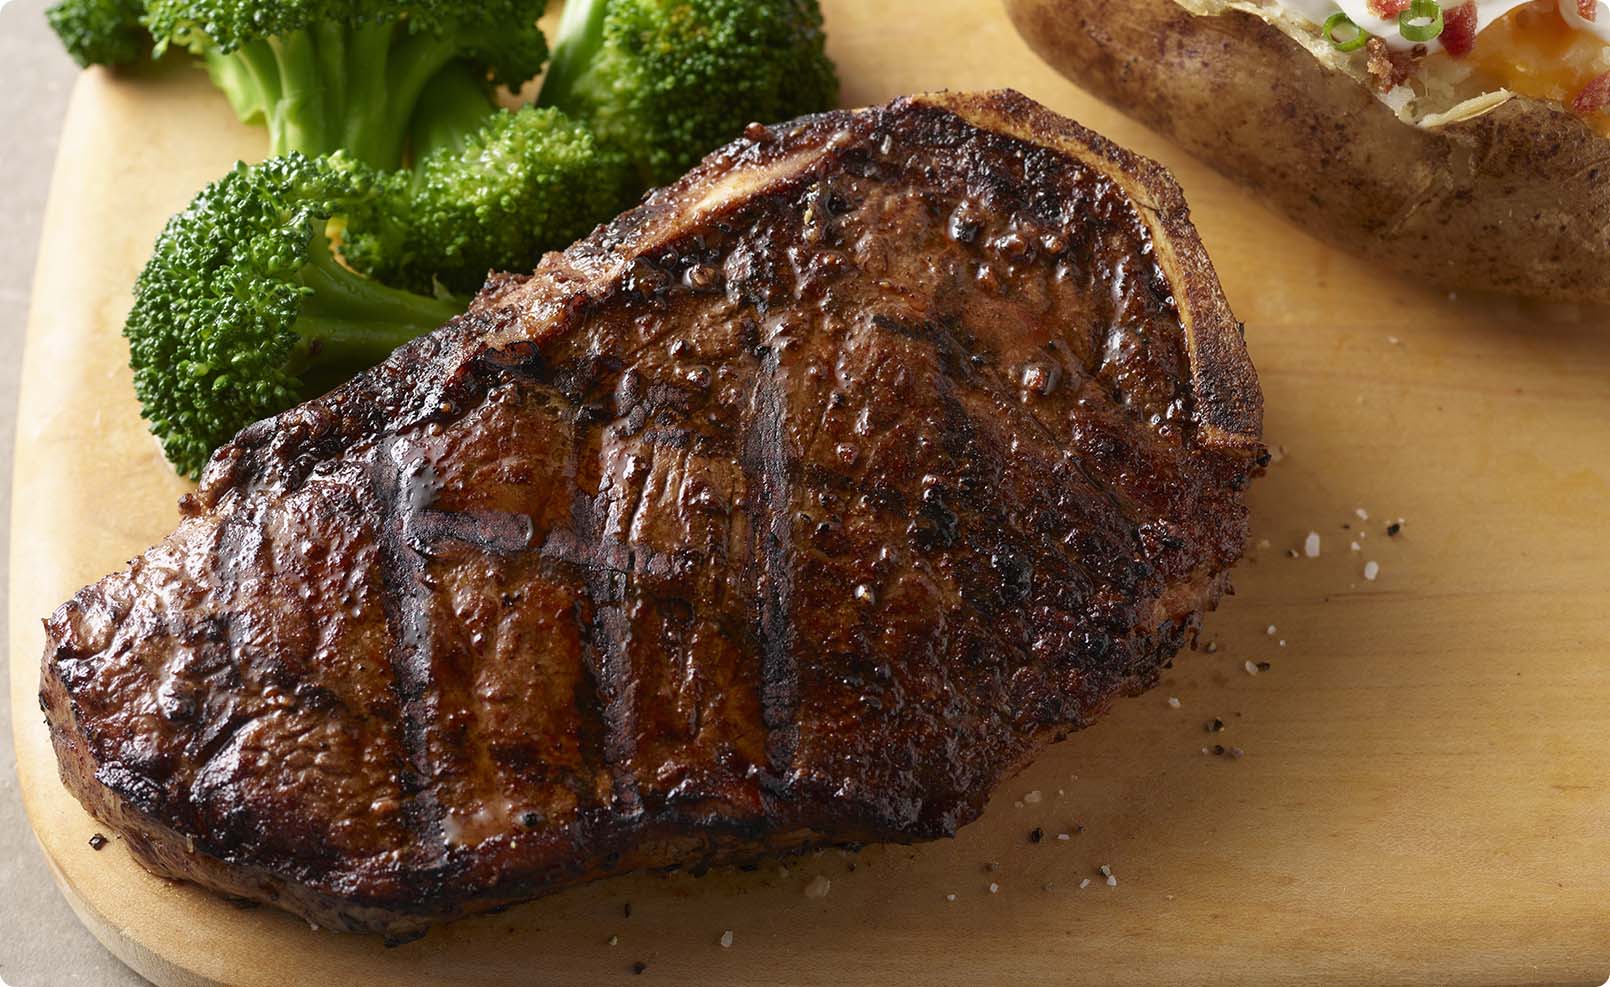 A hand-cut Prime bone-in NY strip steak, with crisp, charred edges. Flakes of salt sprinkled atop the dark brown cut.